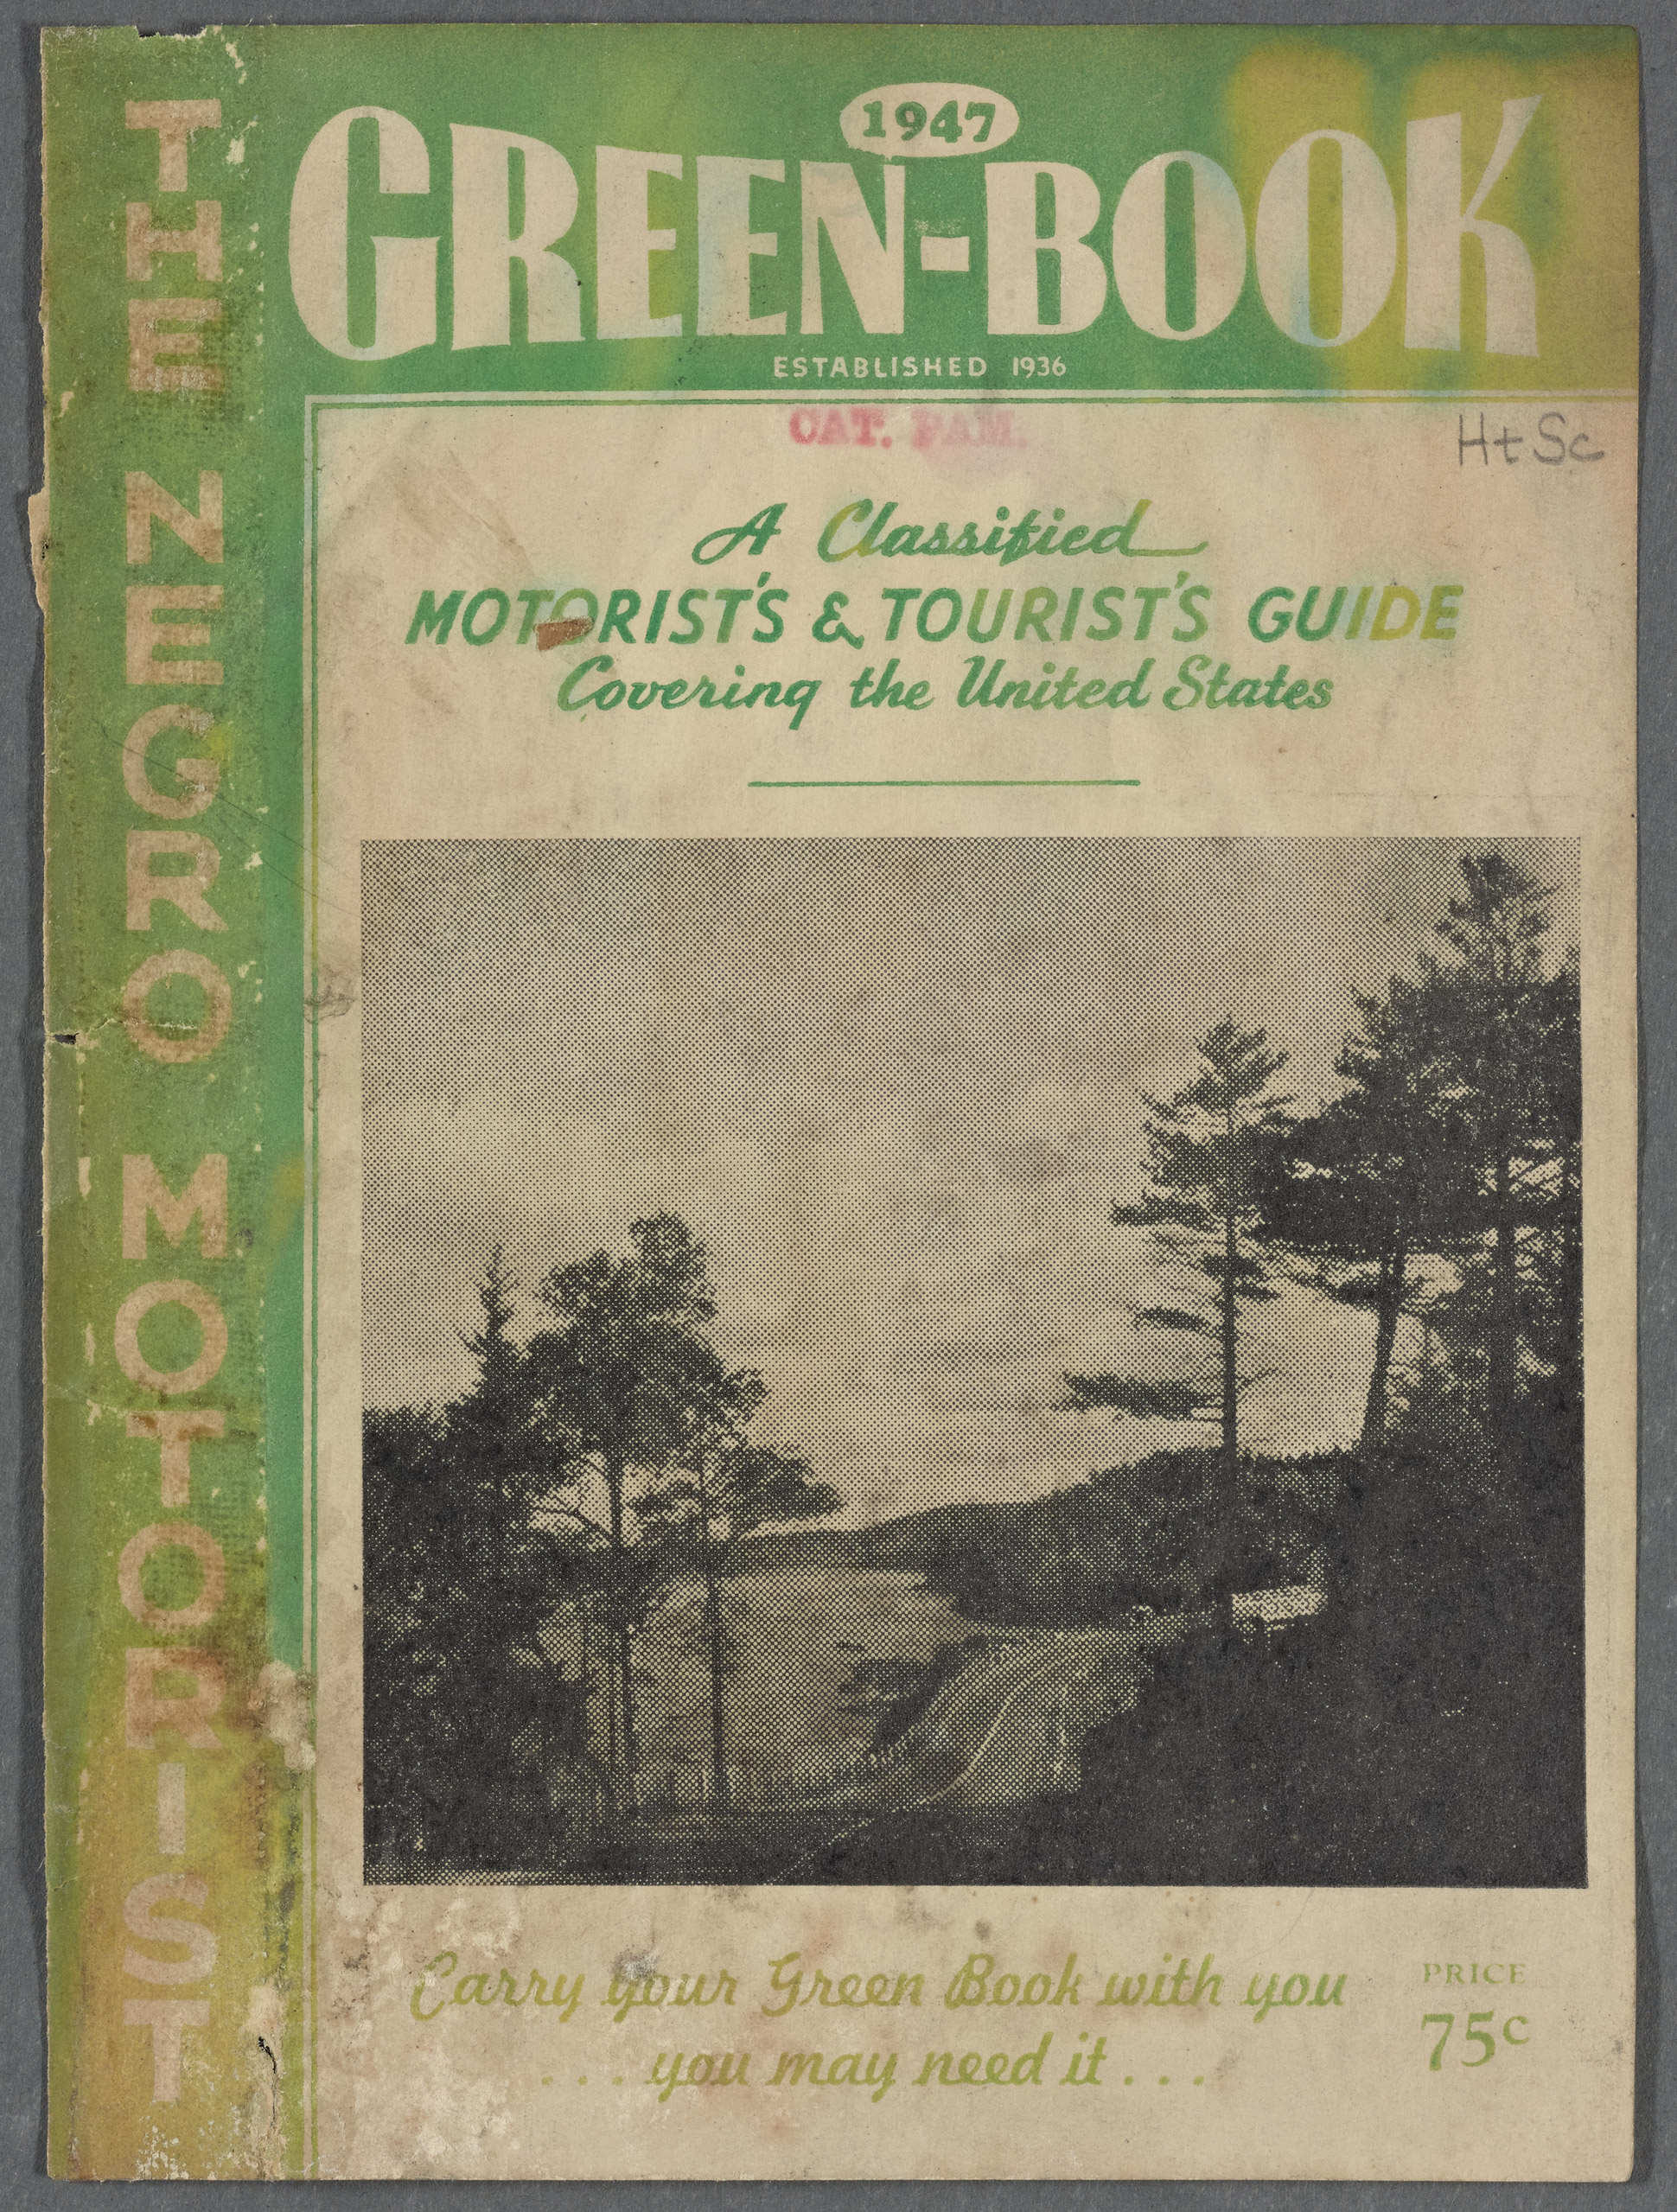 The Travelers' Green Book: 1947.